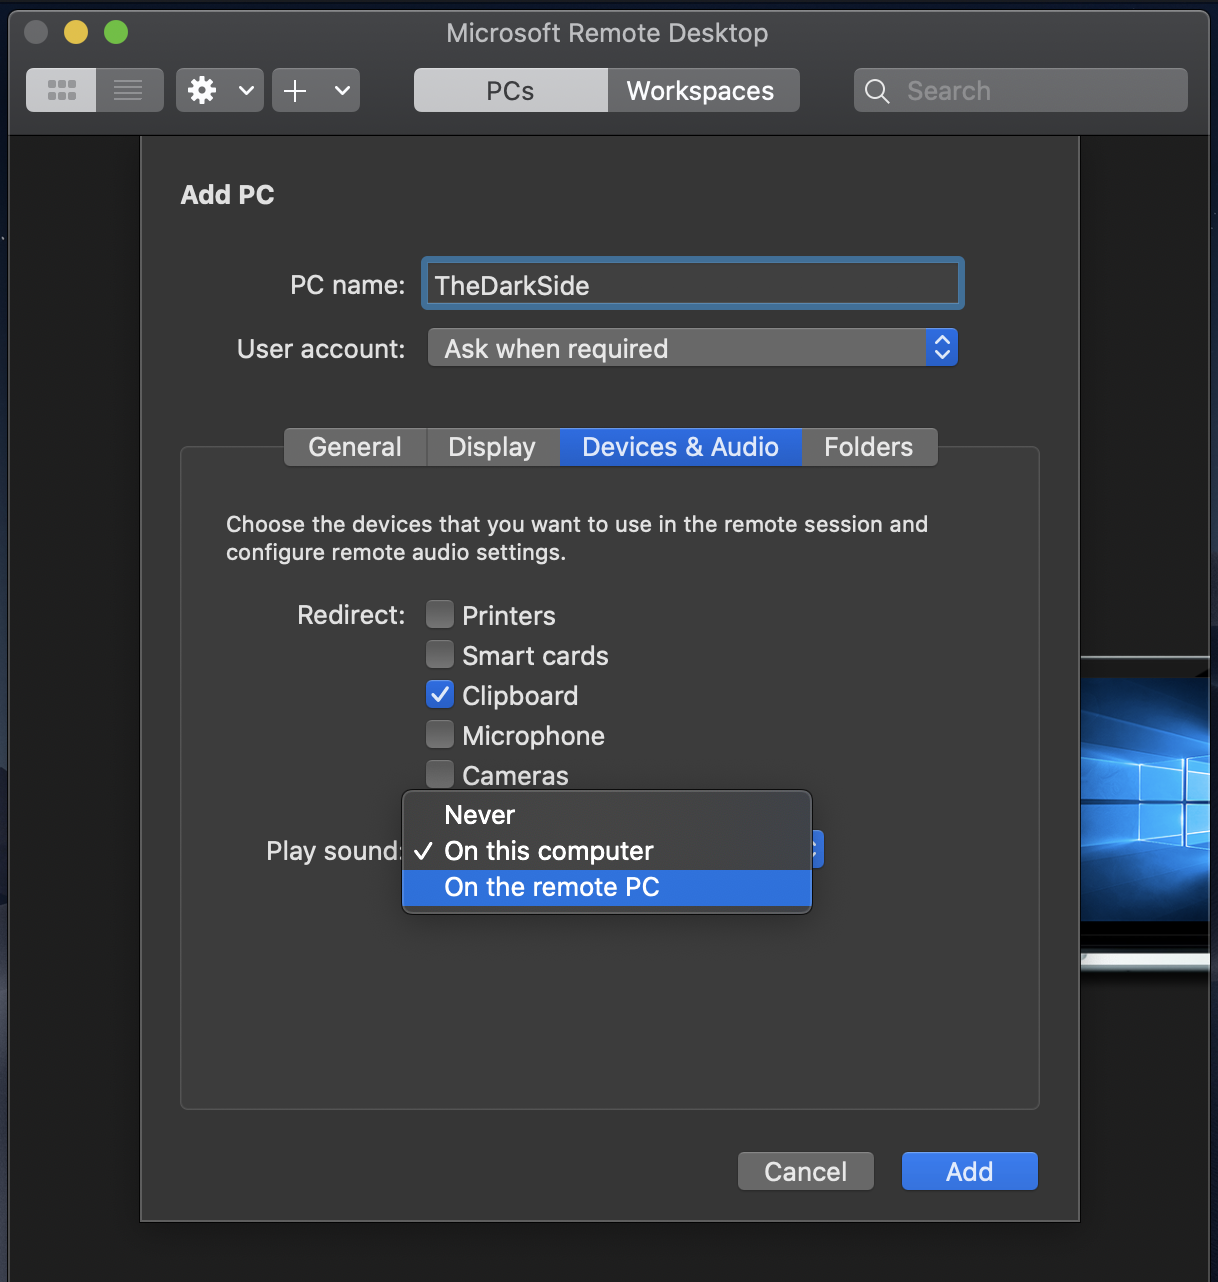 where to find audio options on teamviewer for mac